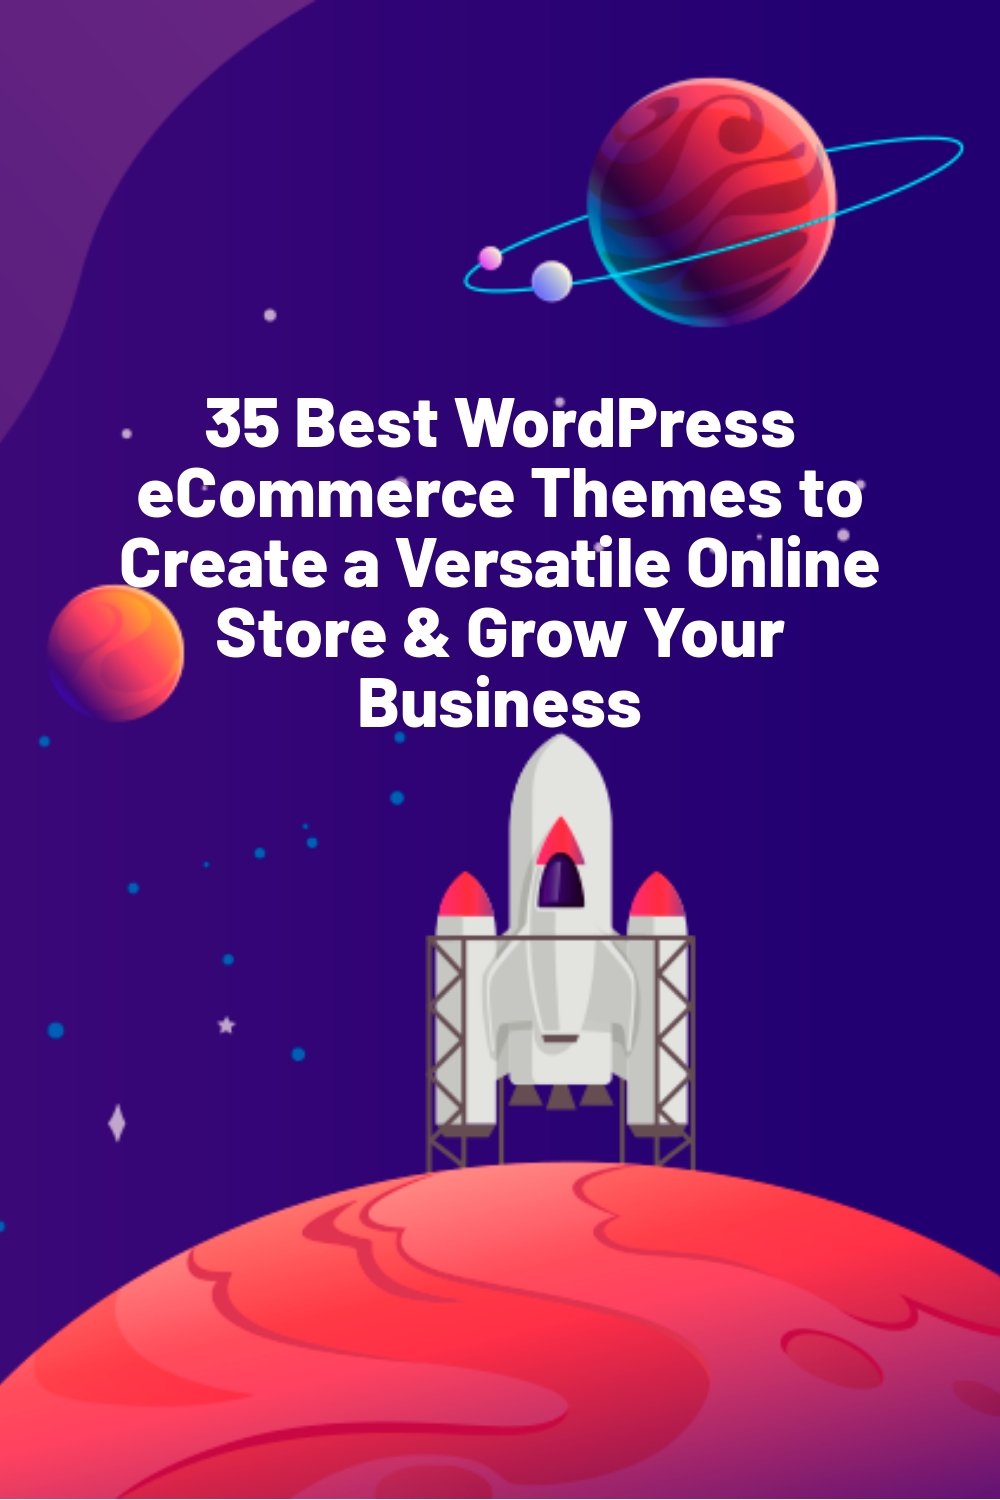 35 Best WordPress eCommerce Themes to Create a Versatile Online Store & Grow Your Business